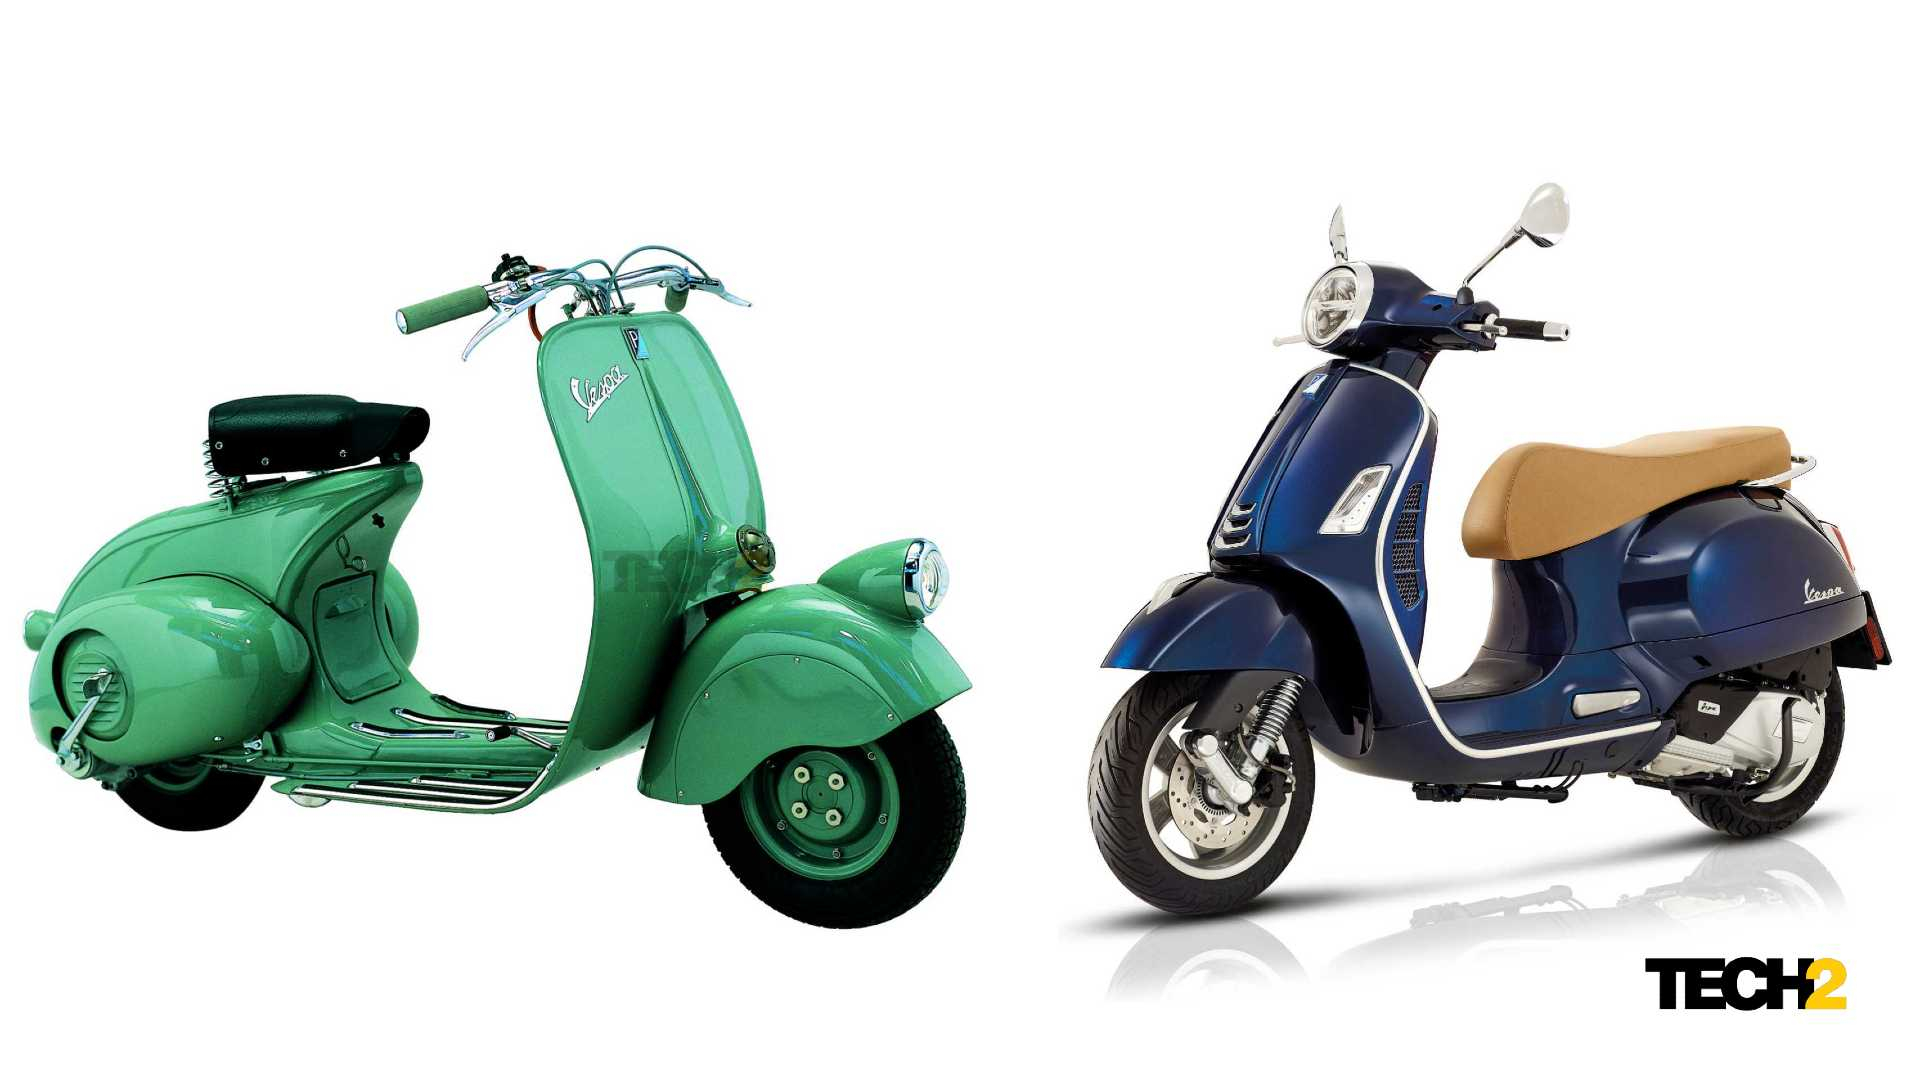 1920x1080 Vespa turns 75 today: A look back at the illustrious journey of a two-wheeled icon- Technology News, Firstpost